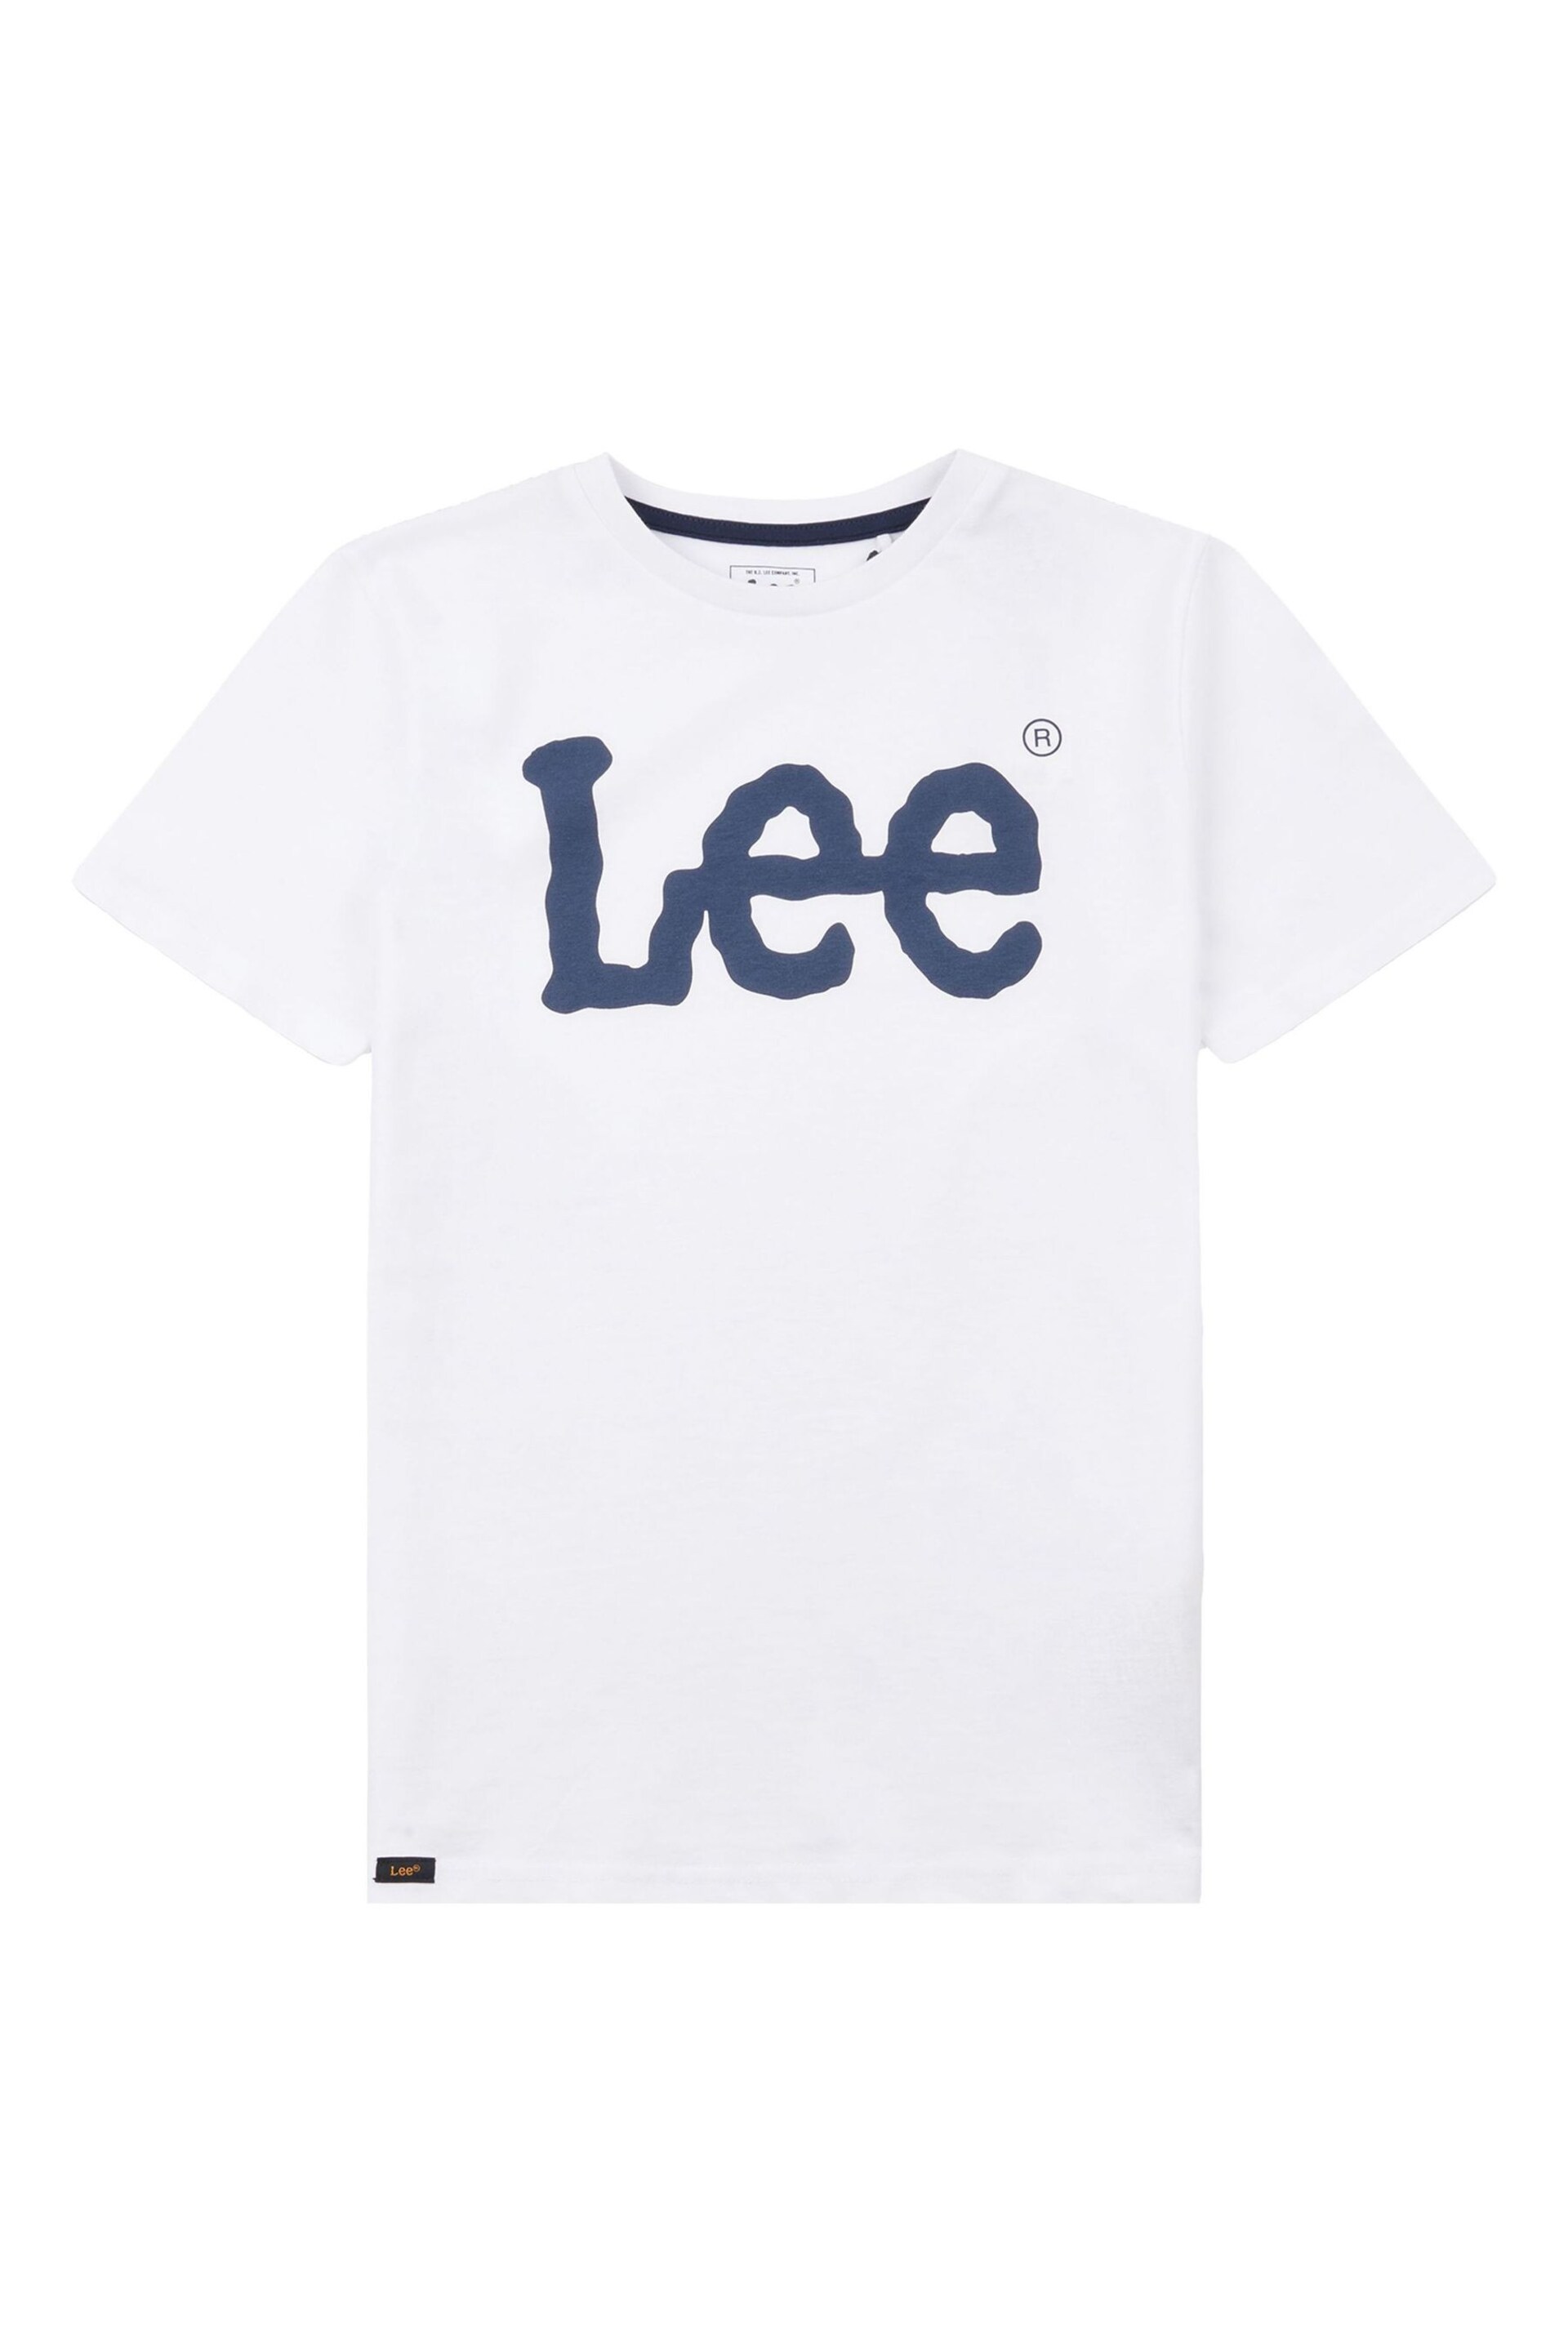 Lee Boys Classic Wobbly T-Shirt - Image 4 of 5